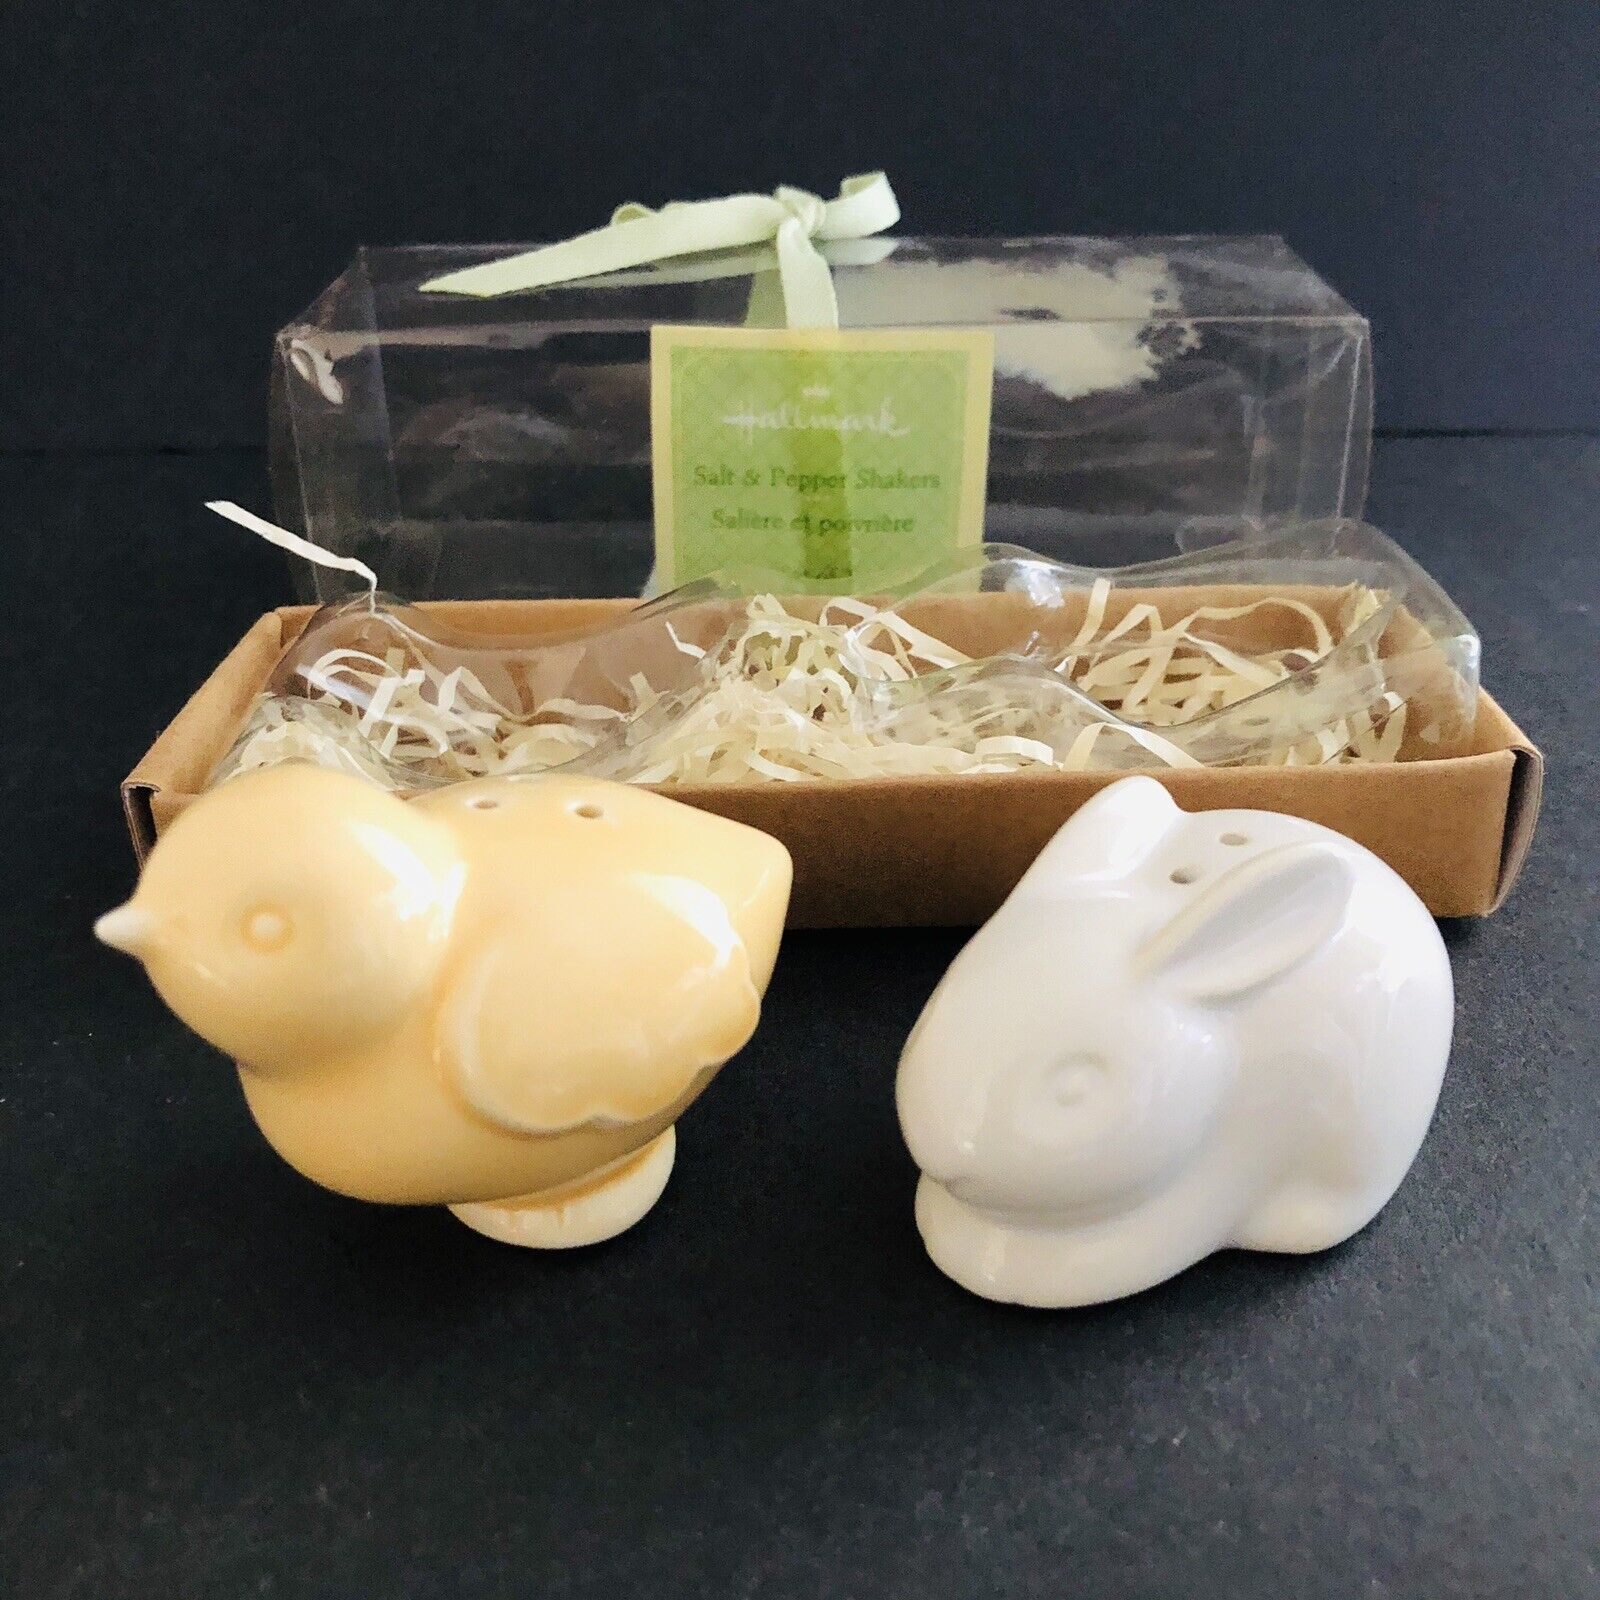 Primary image for Hallmark Chick & Bunny Salt & Pepper Shakers 2.25 inch long Spring Easter